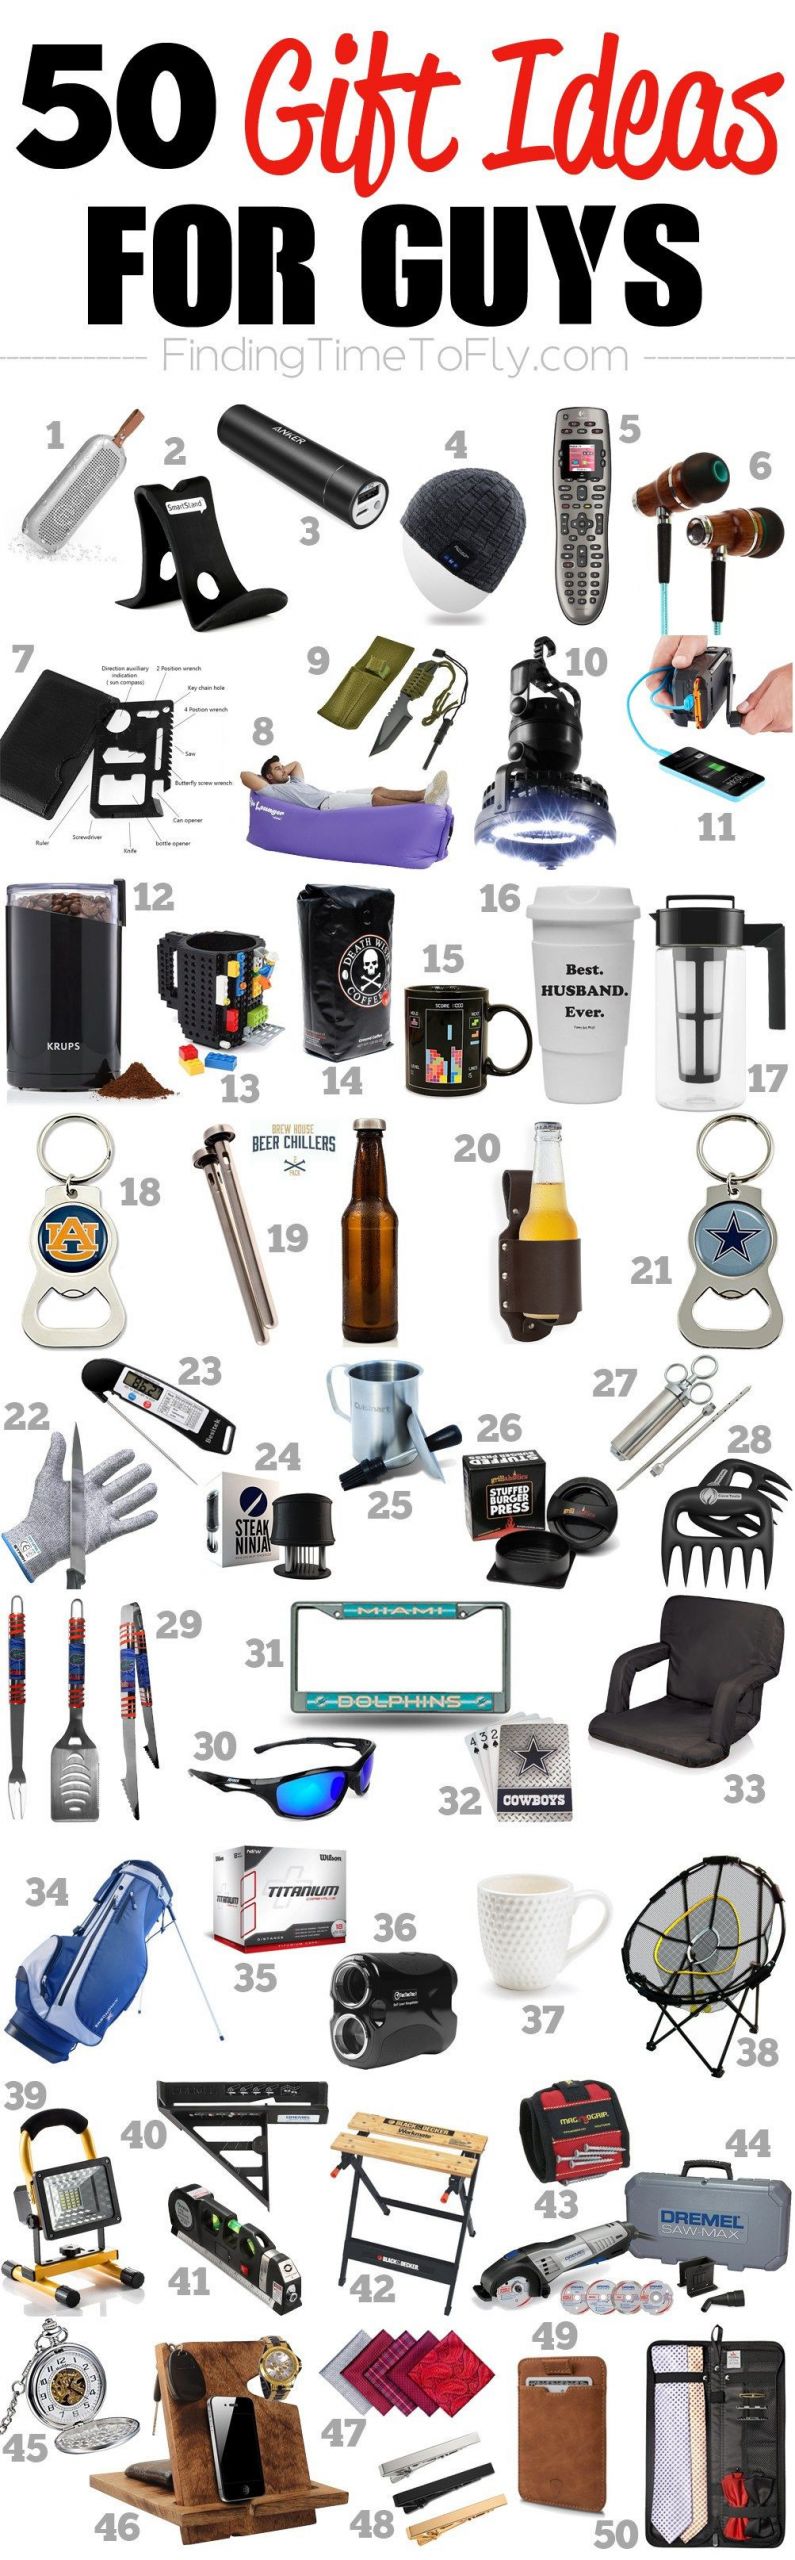 Cool Valentines Gift Ideas For Men
 50 Gifts for Guys for Every Occasion